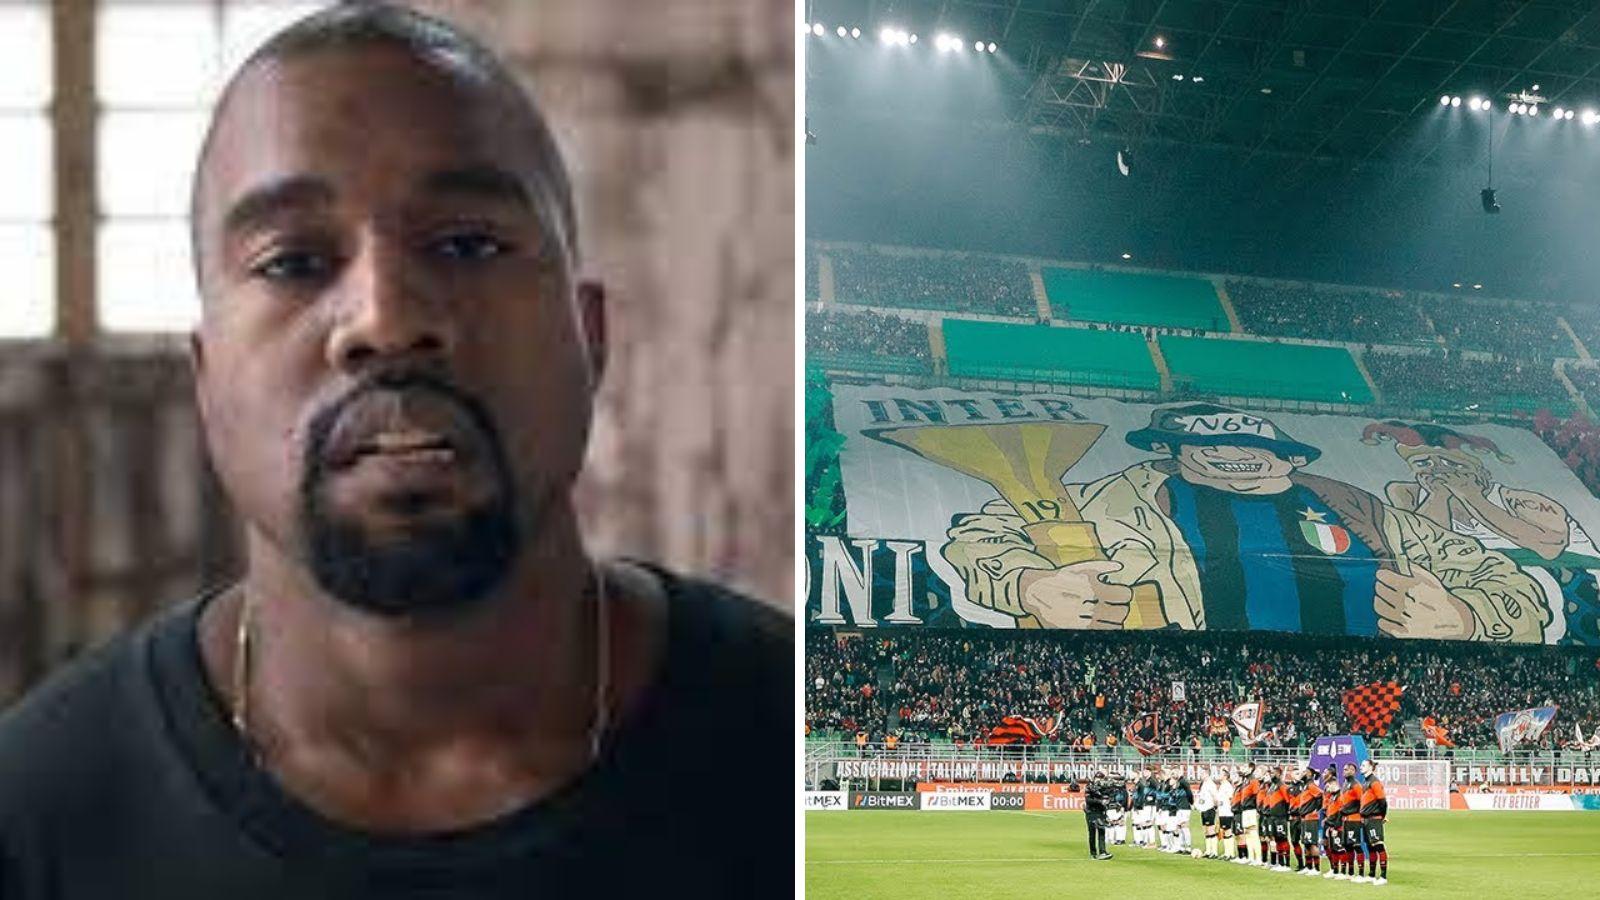 Kanye West has teamed up with Inter Milan Ultras for two tracks on his new album